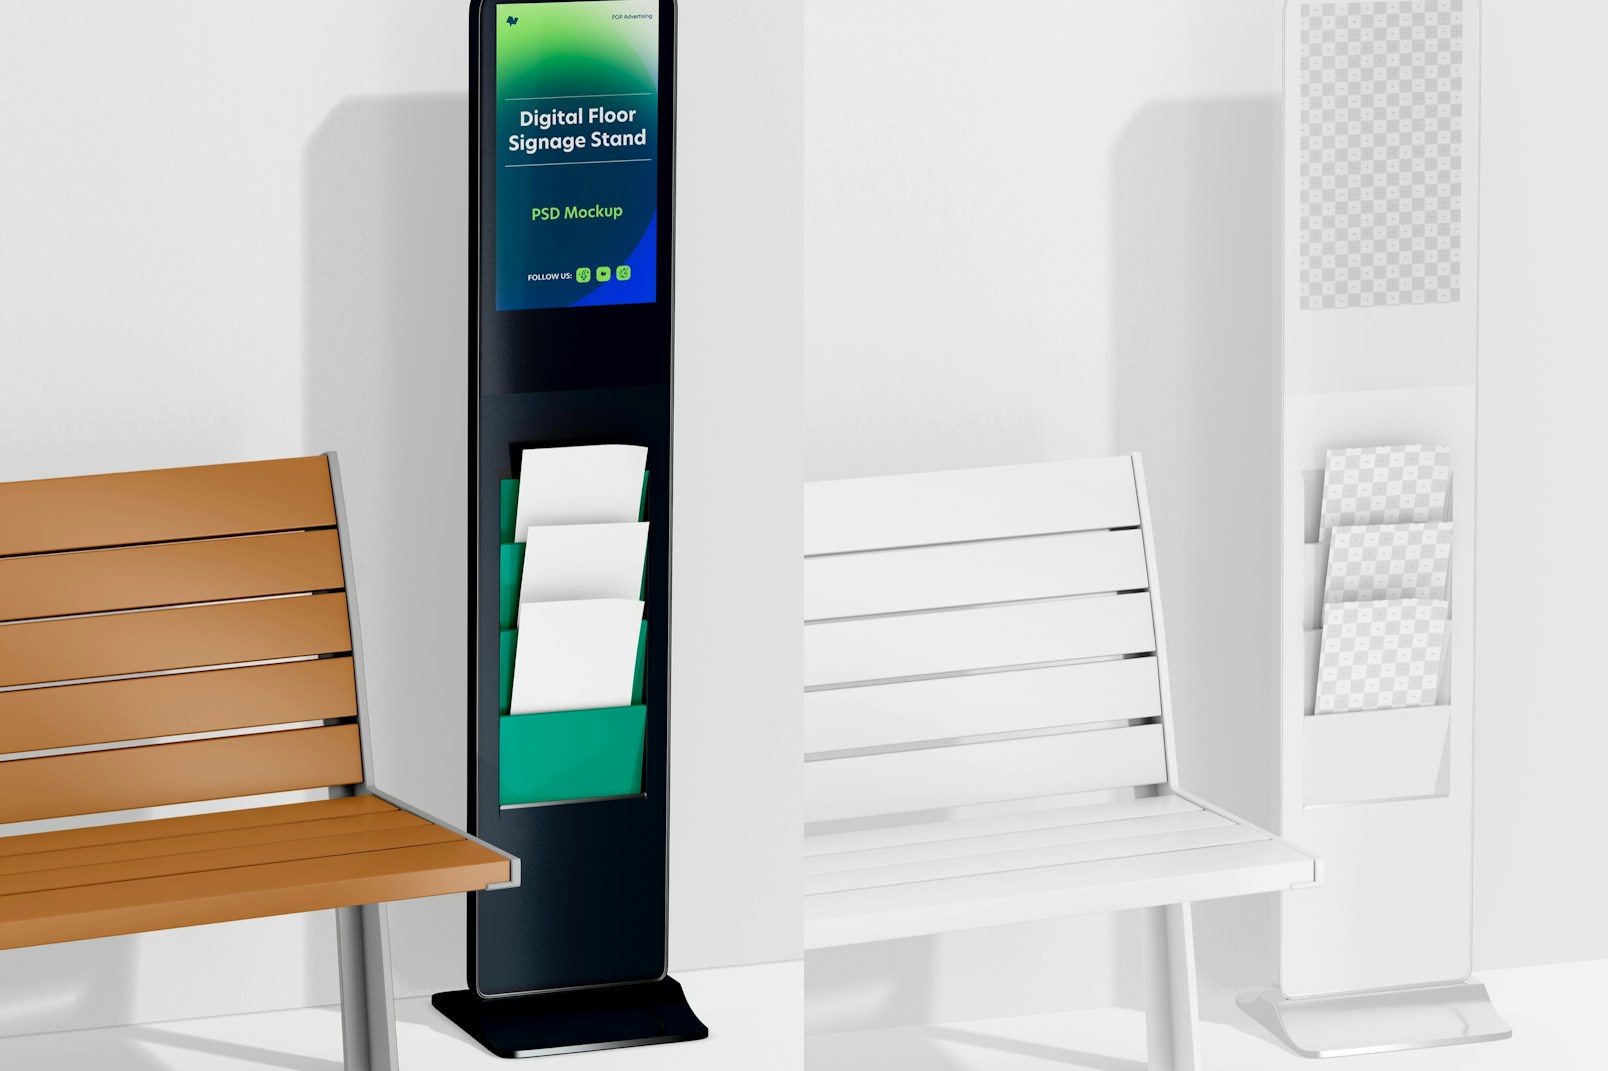 Digital Floor Signage Stand with Bench Mockup